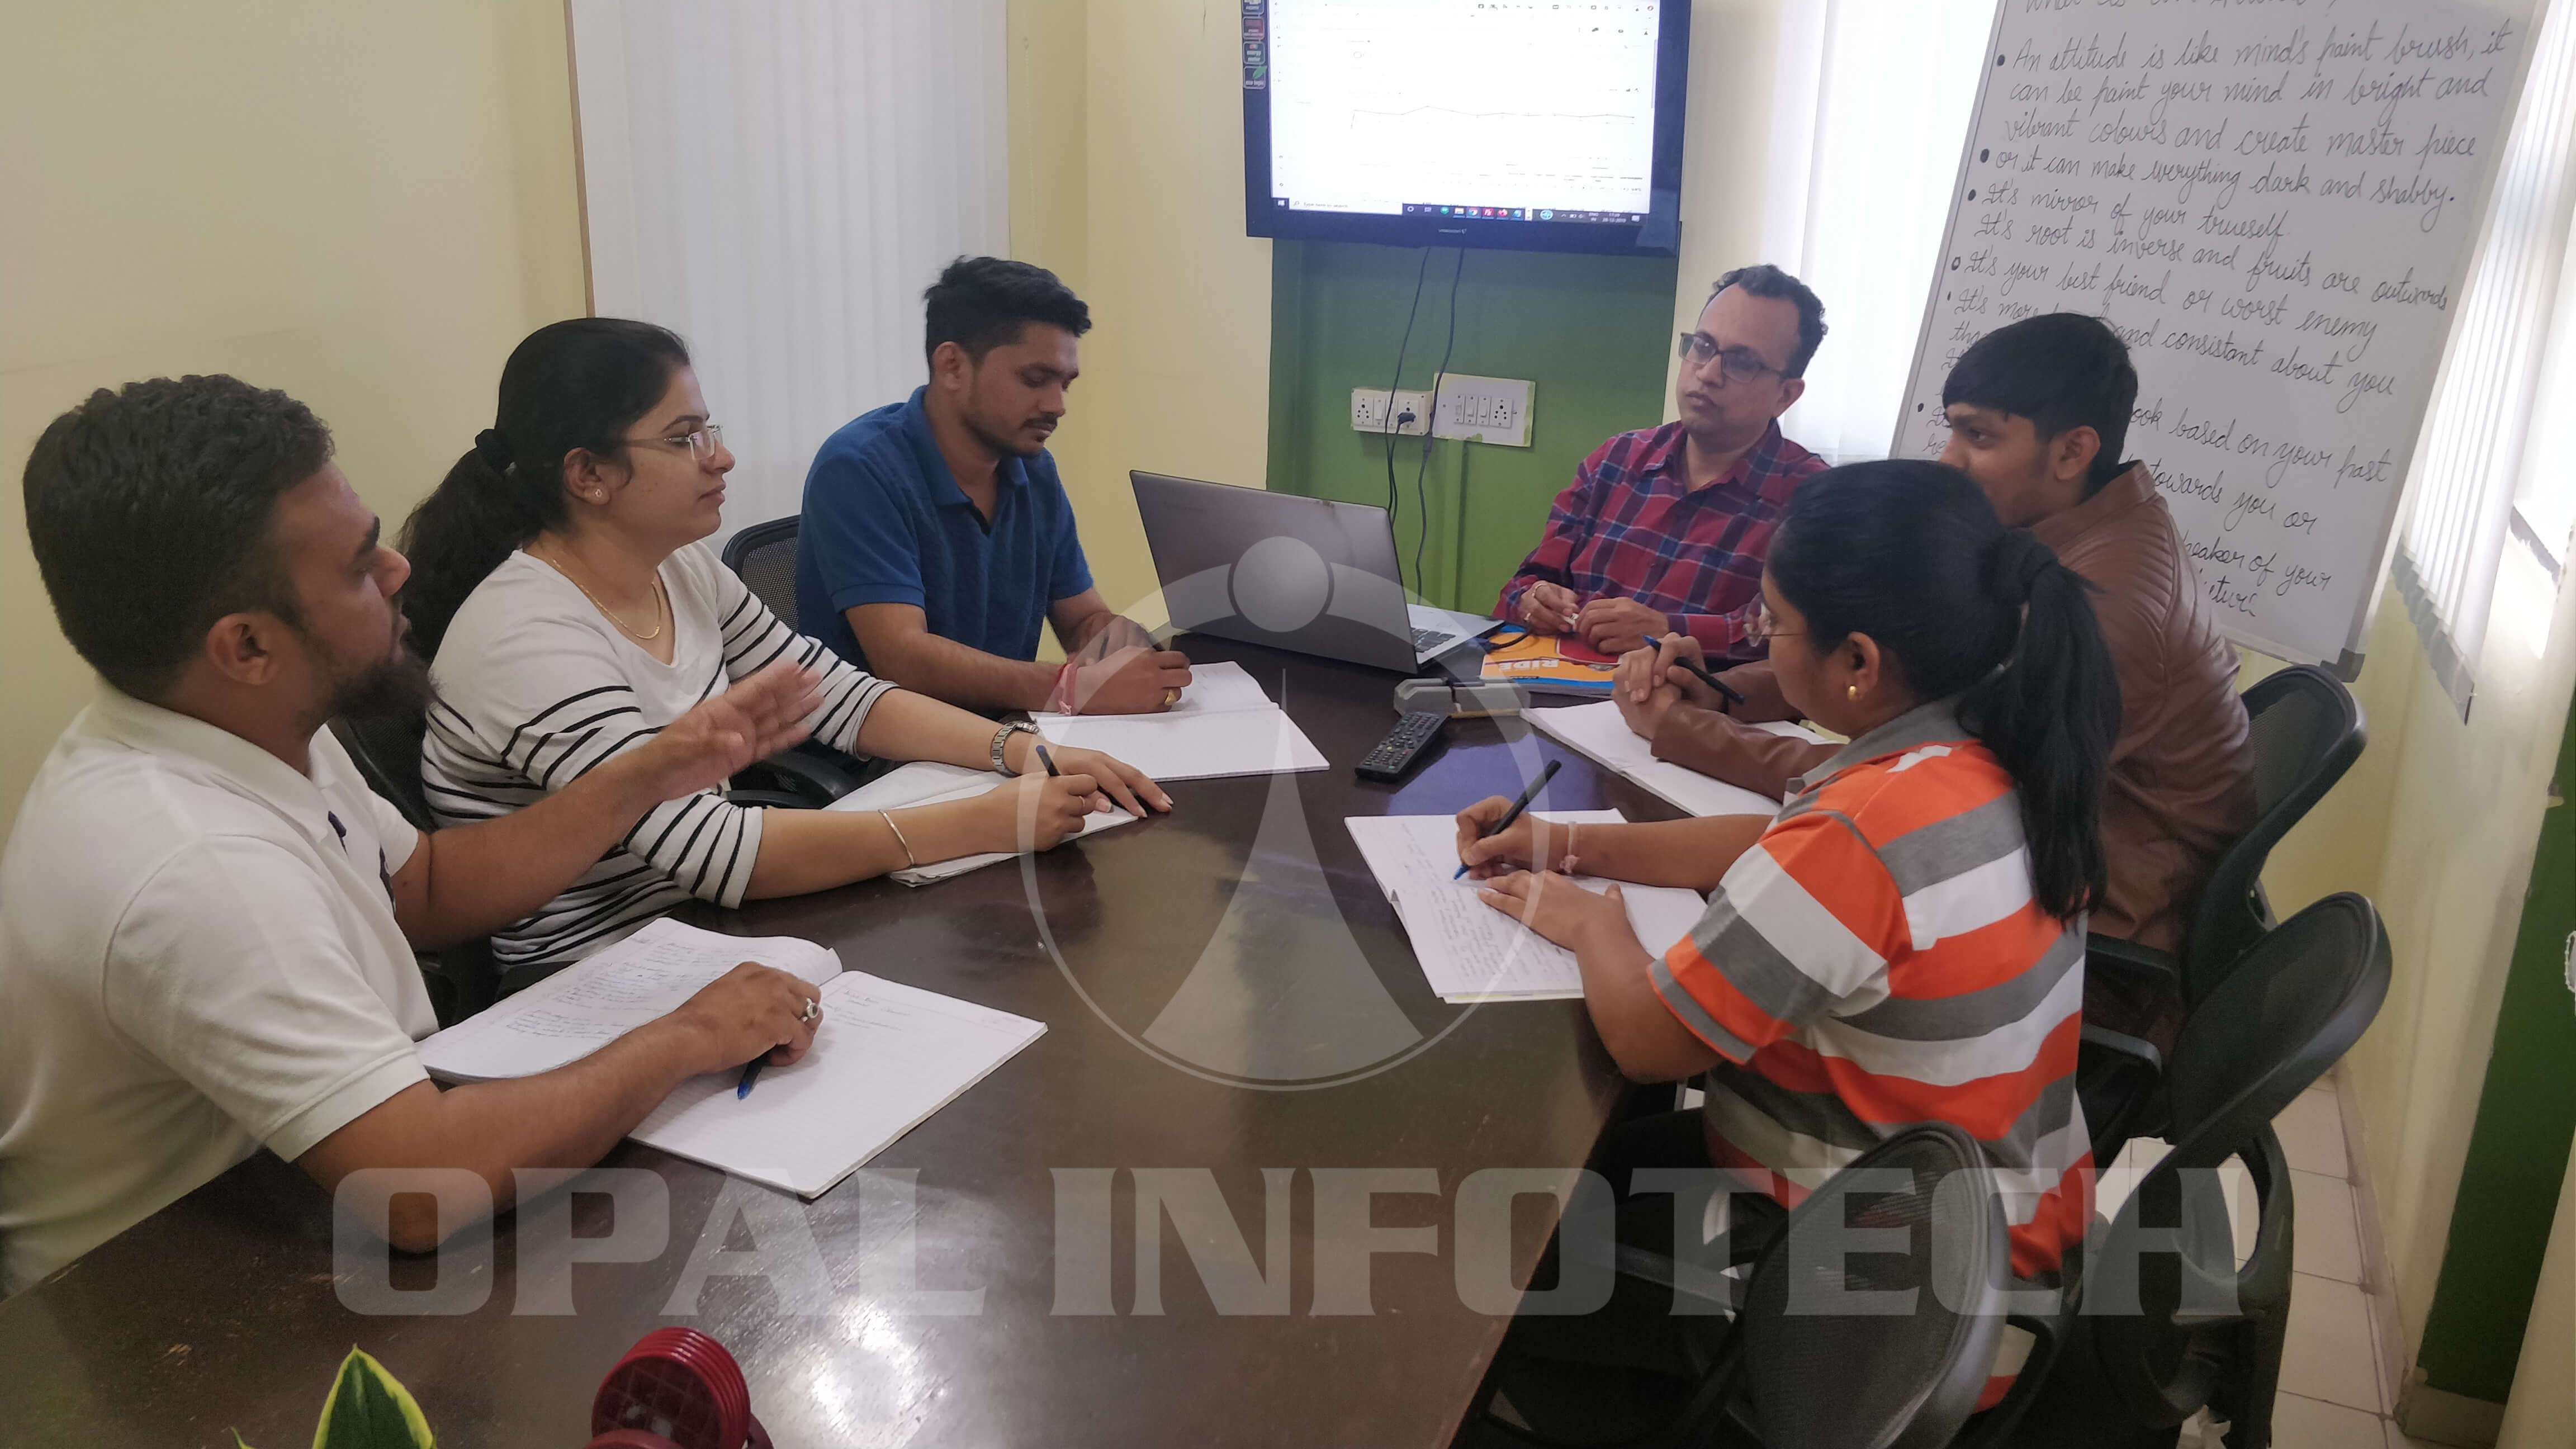 SEO Team discussion and Analysis at Opal Infotech